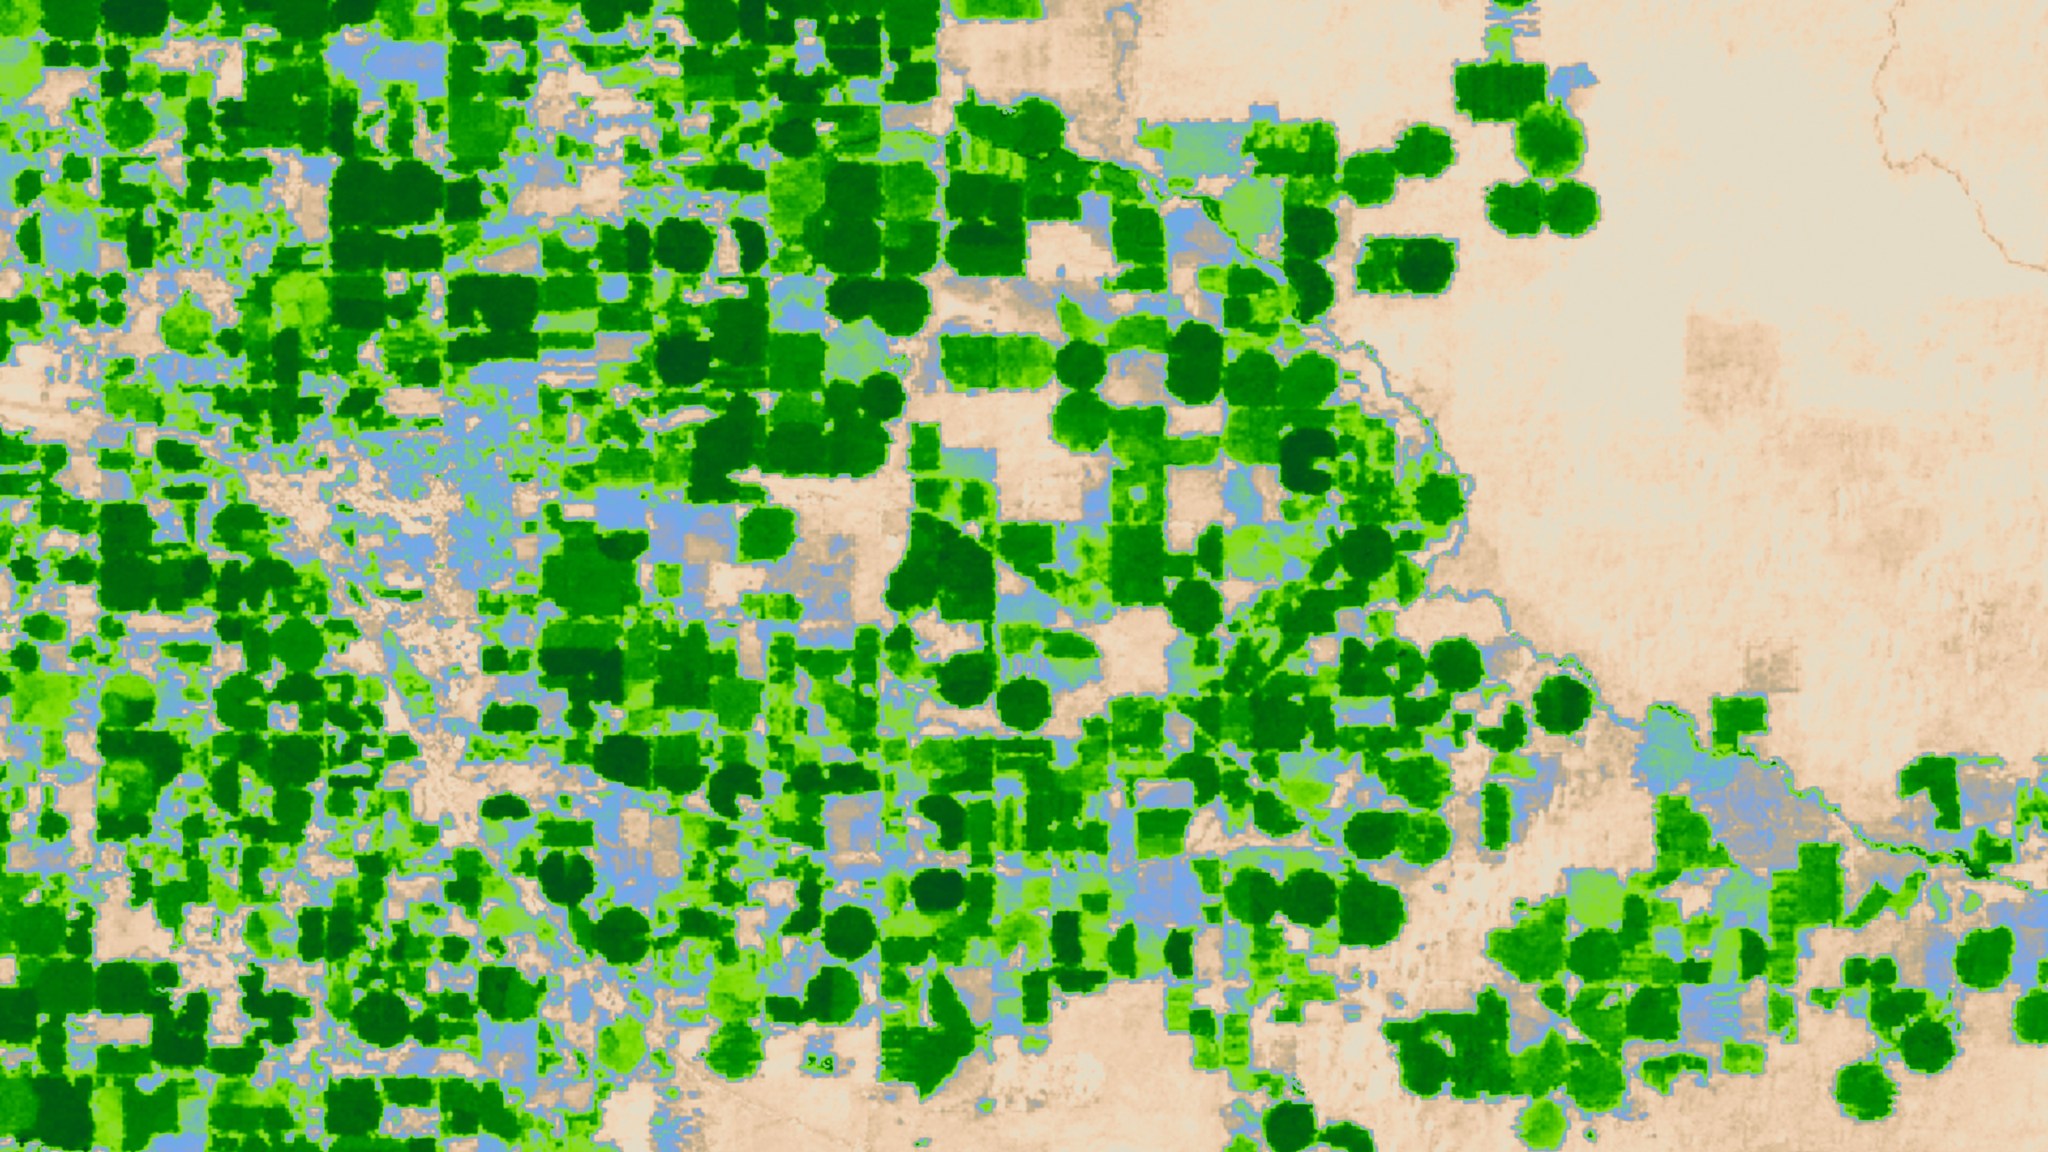 Image taken by the Landsat satellite showing an agricultural region in Idaho on August 14, 2000